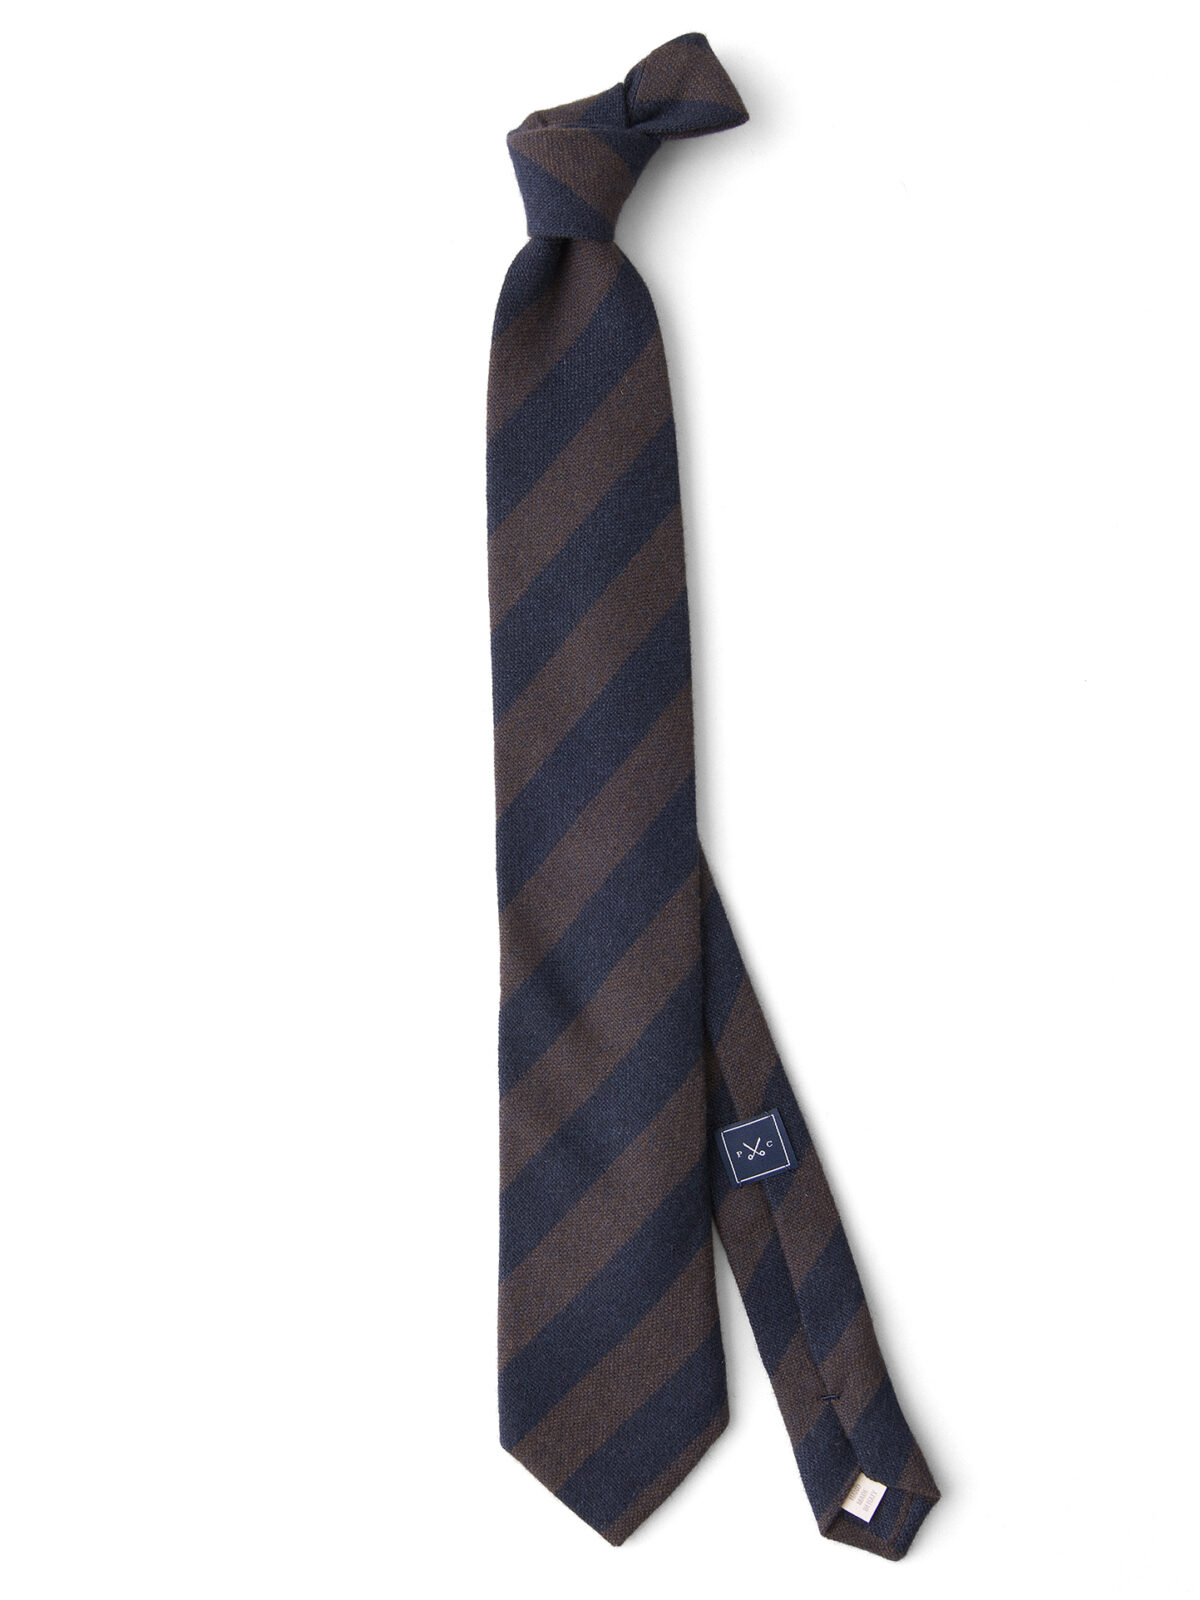 Mocha and Navy Striped Cashmere Tie